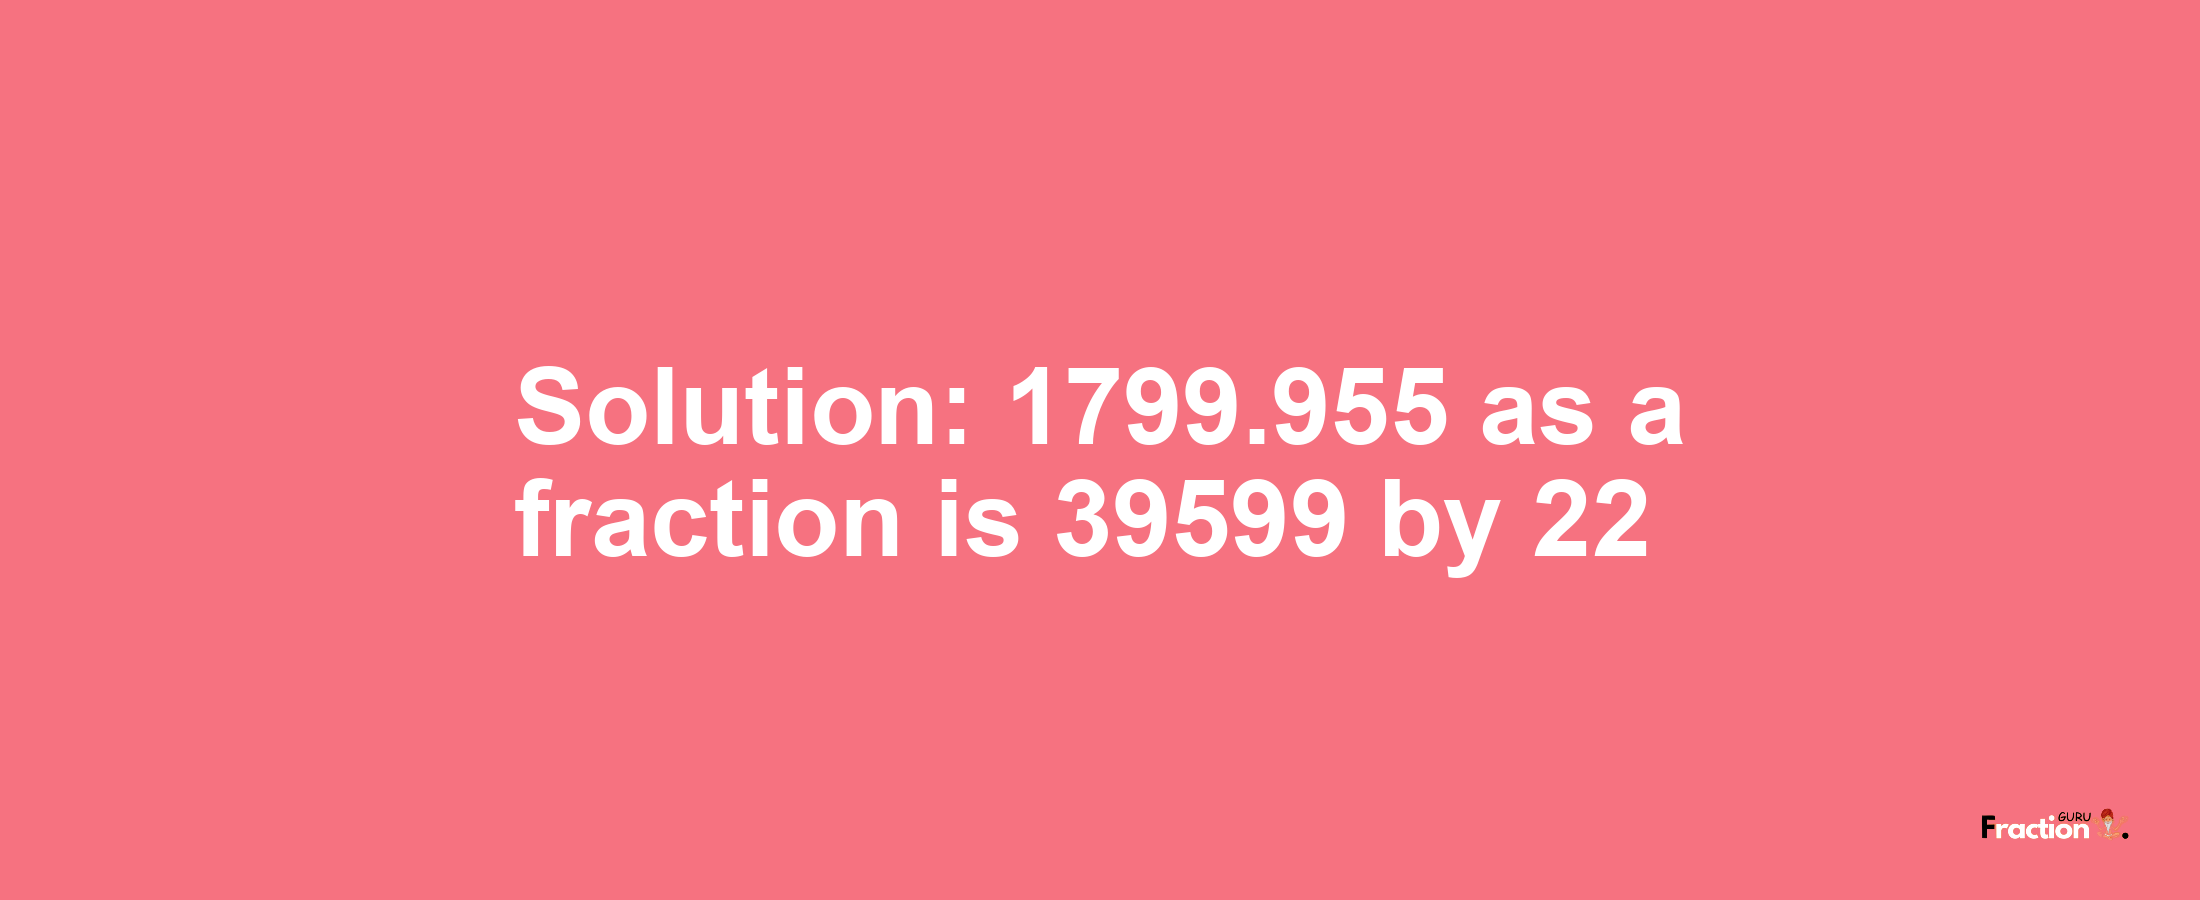 Solution:1799.955 as a fraction is 39599/22